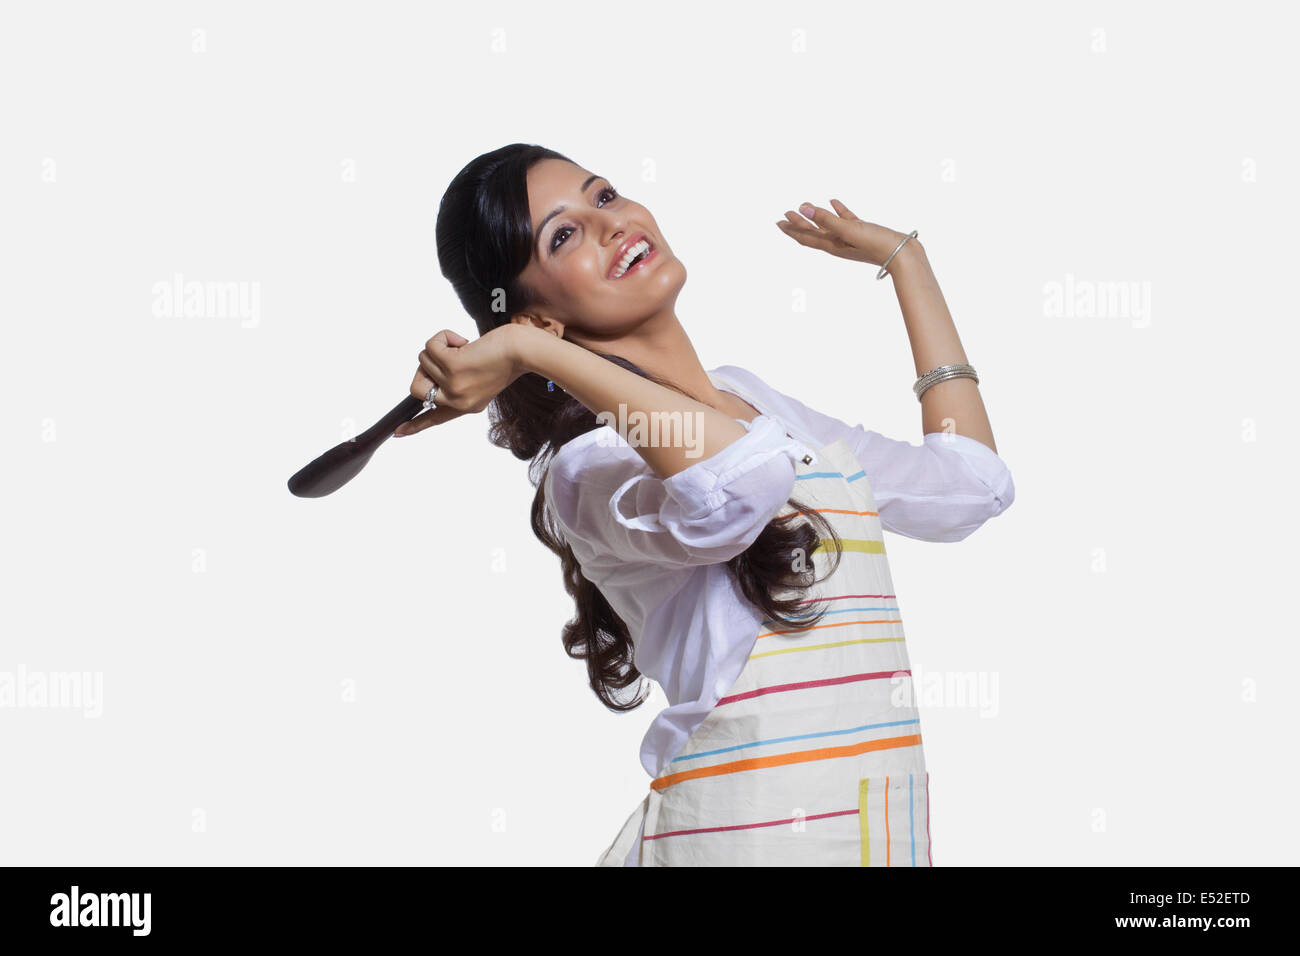 Woman with a cooking utensil rejoicing Stock Photo